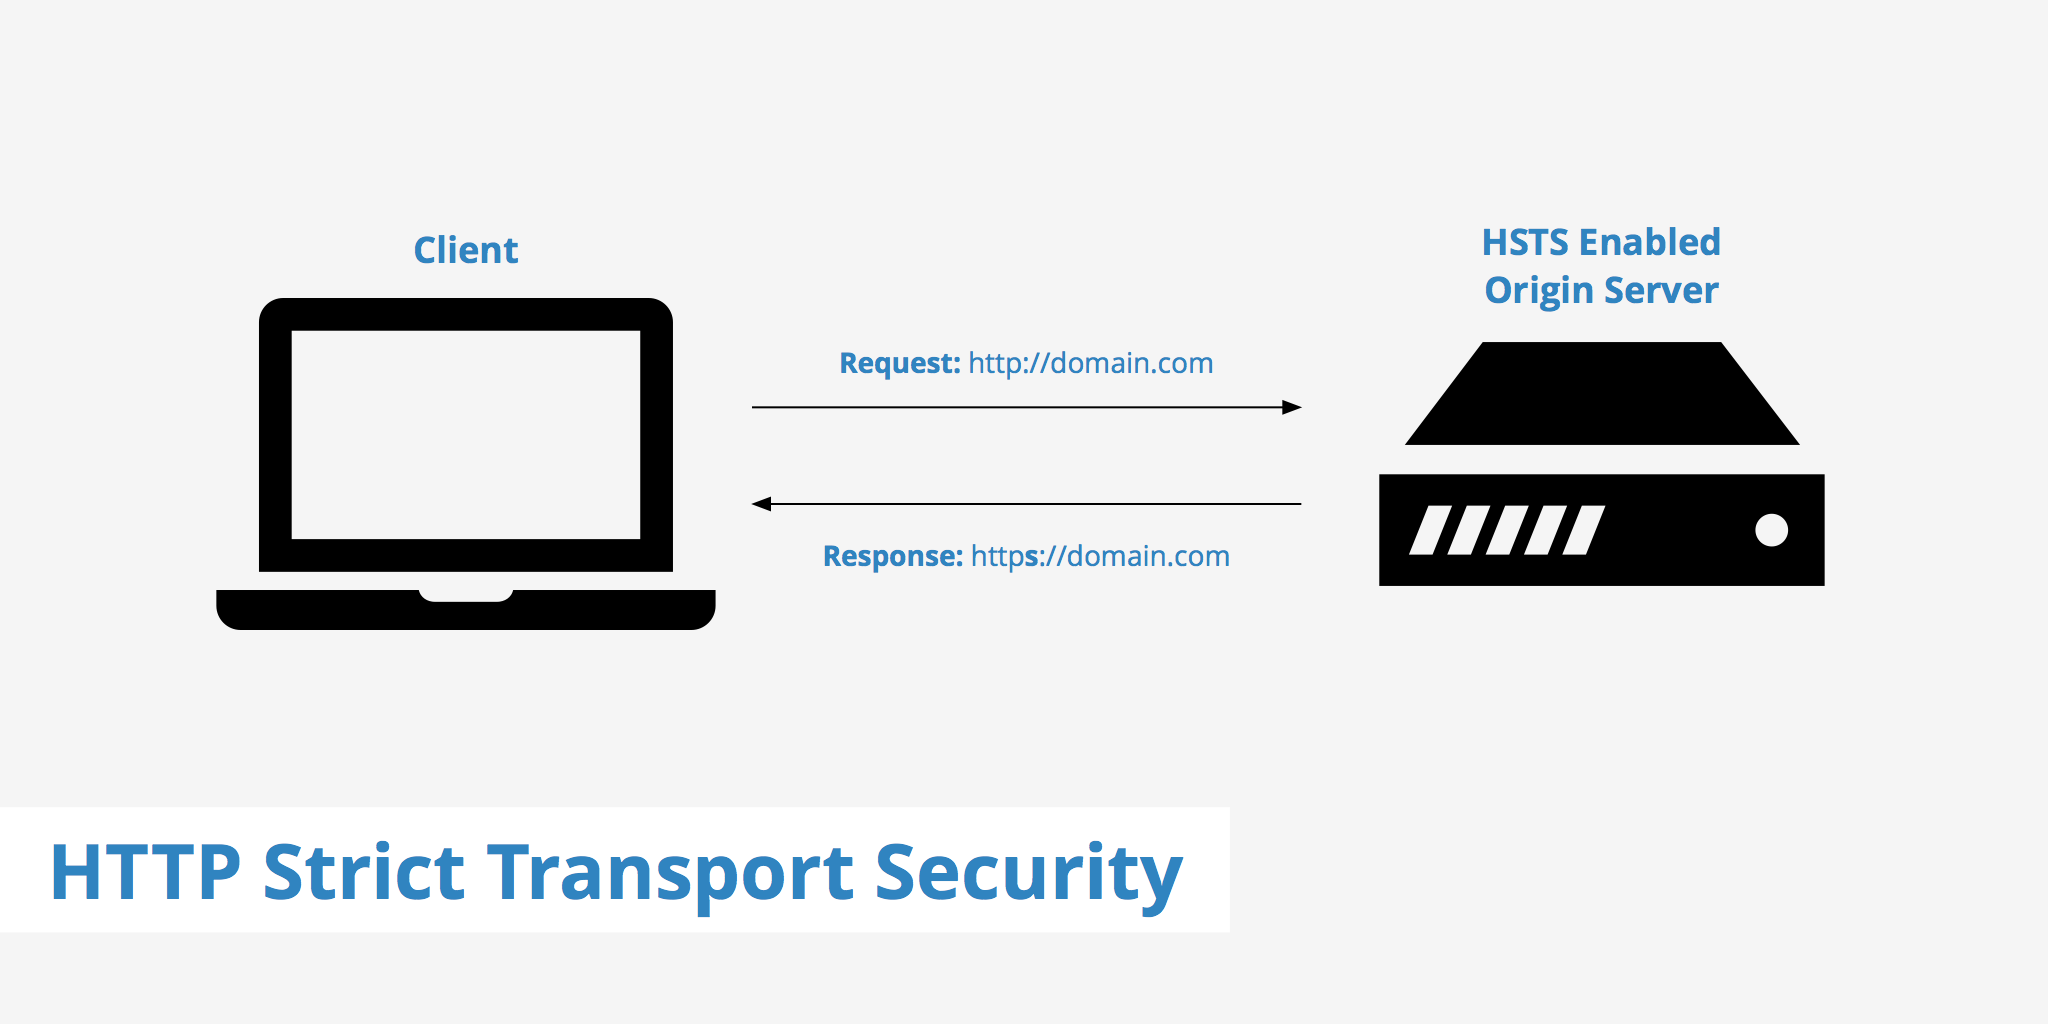 How to Enable HSTS